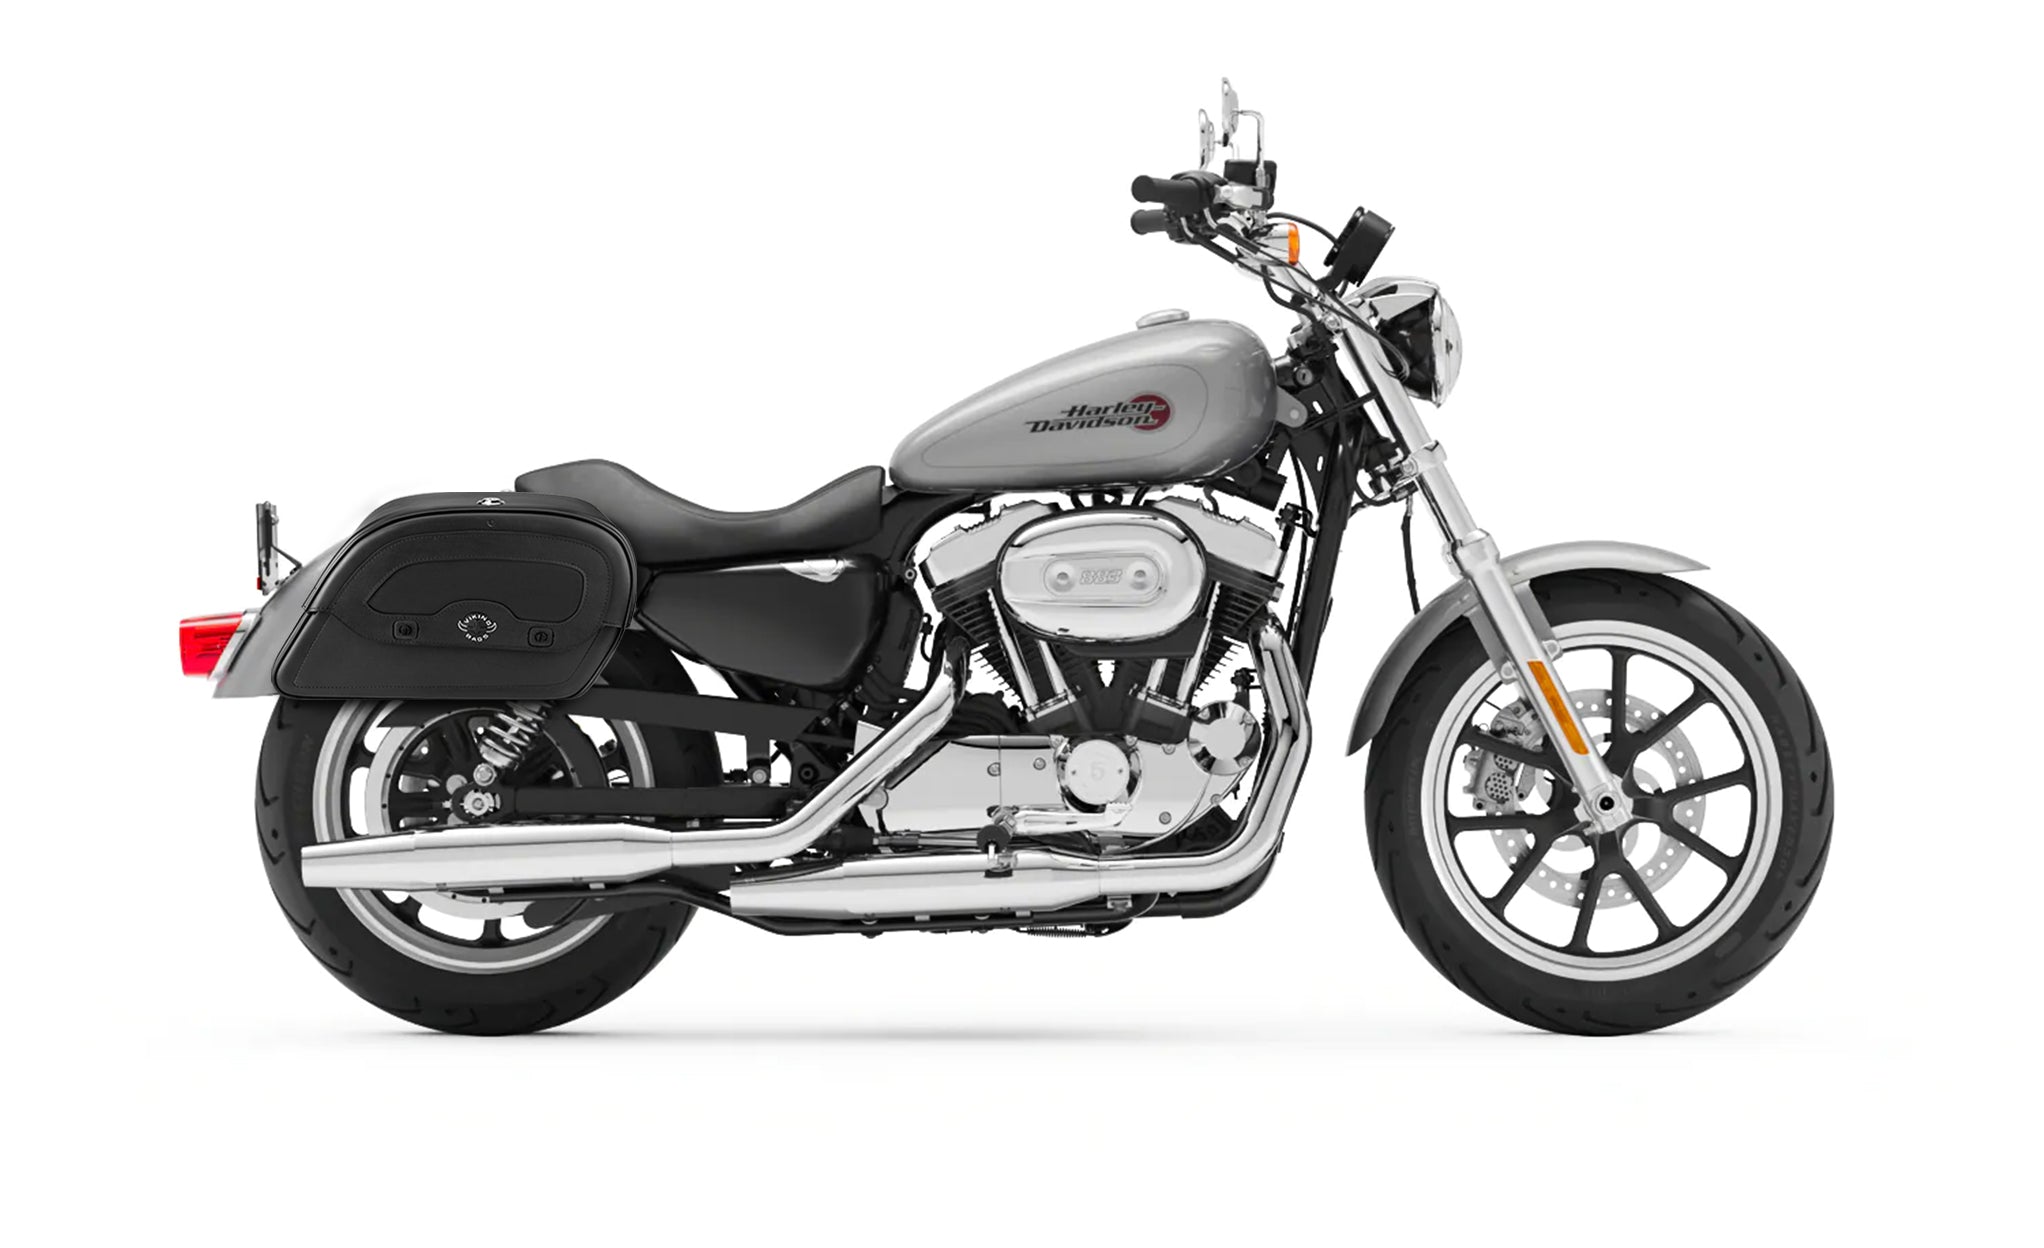 22L - Warrior Medium Quick-Mount Motorcycle Saddlebags For Harley Sportster Superlow @expand